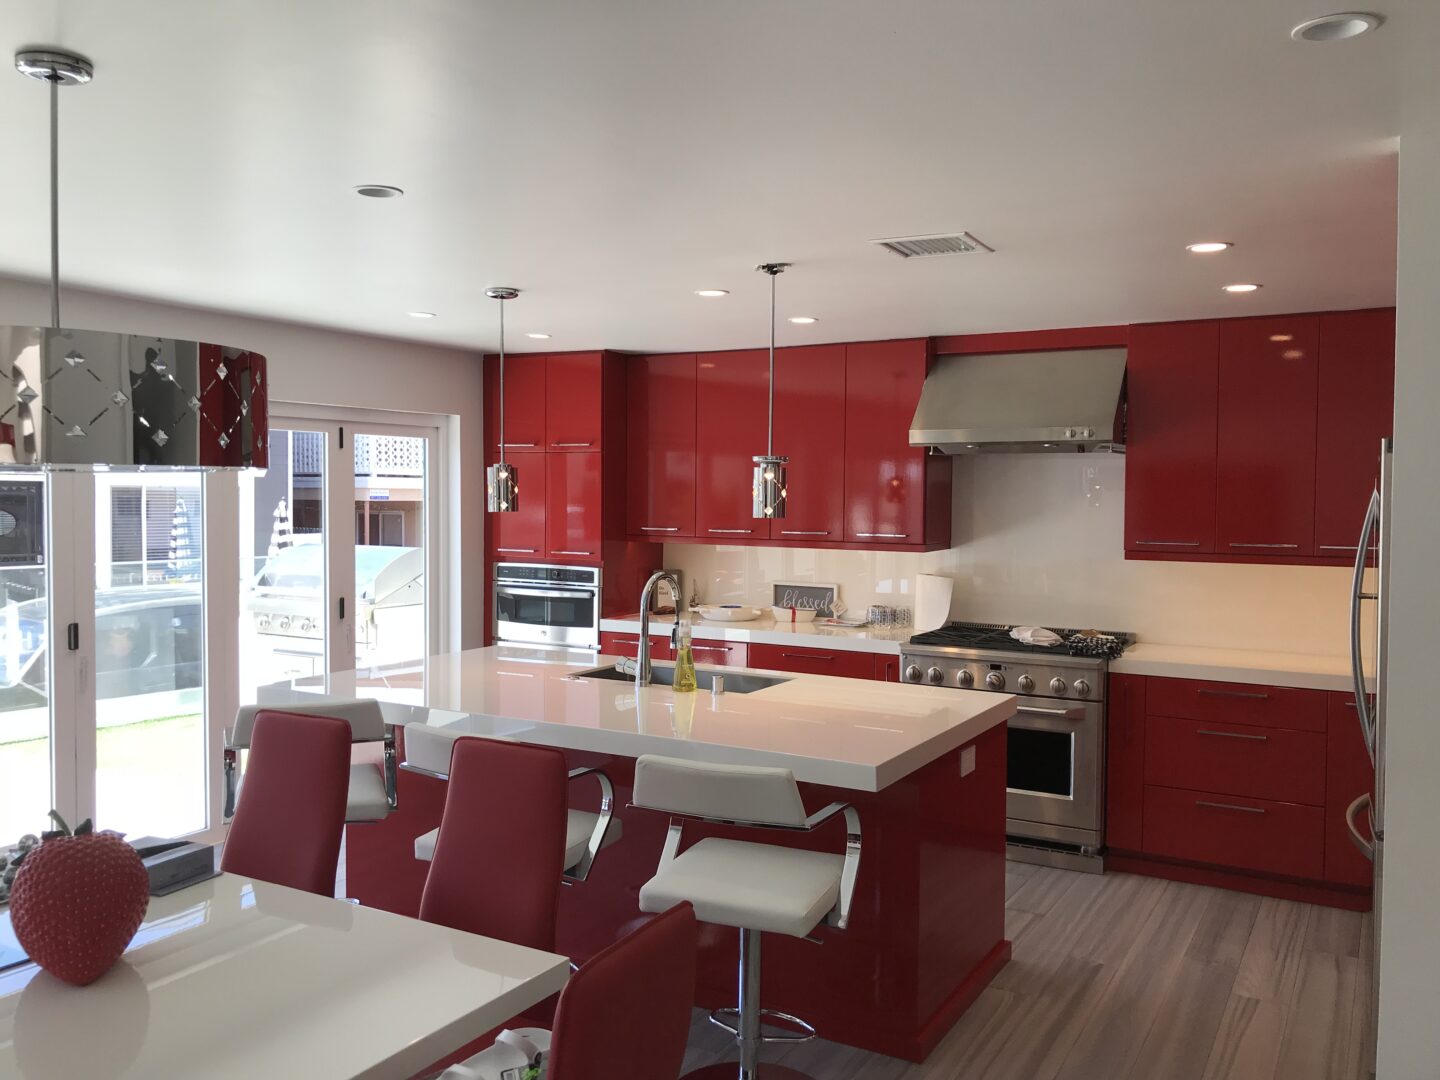 A kitchen and dining area with red furniture